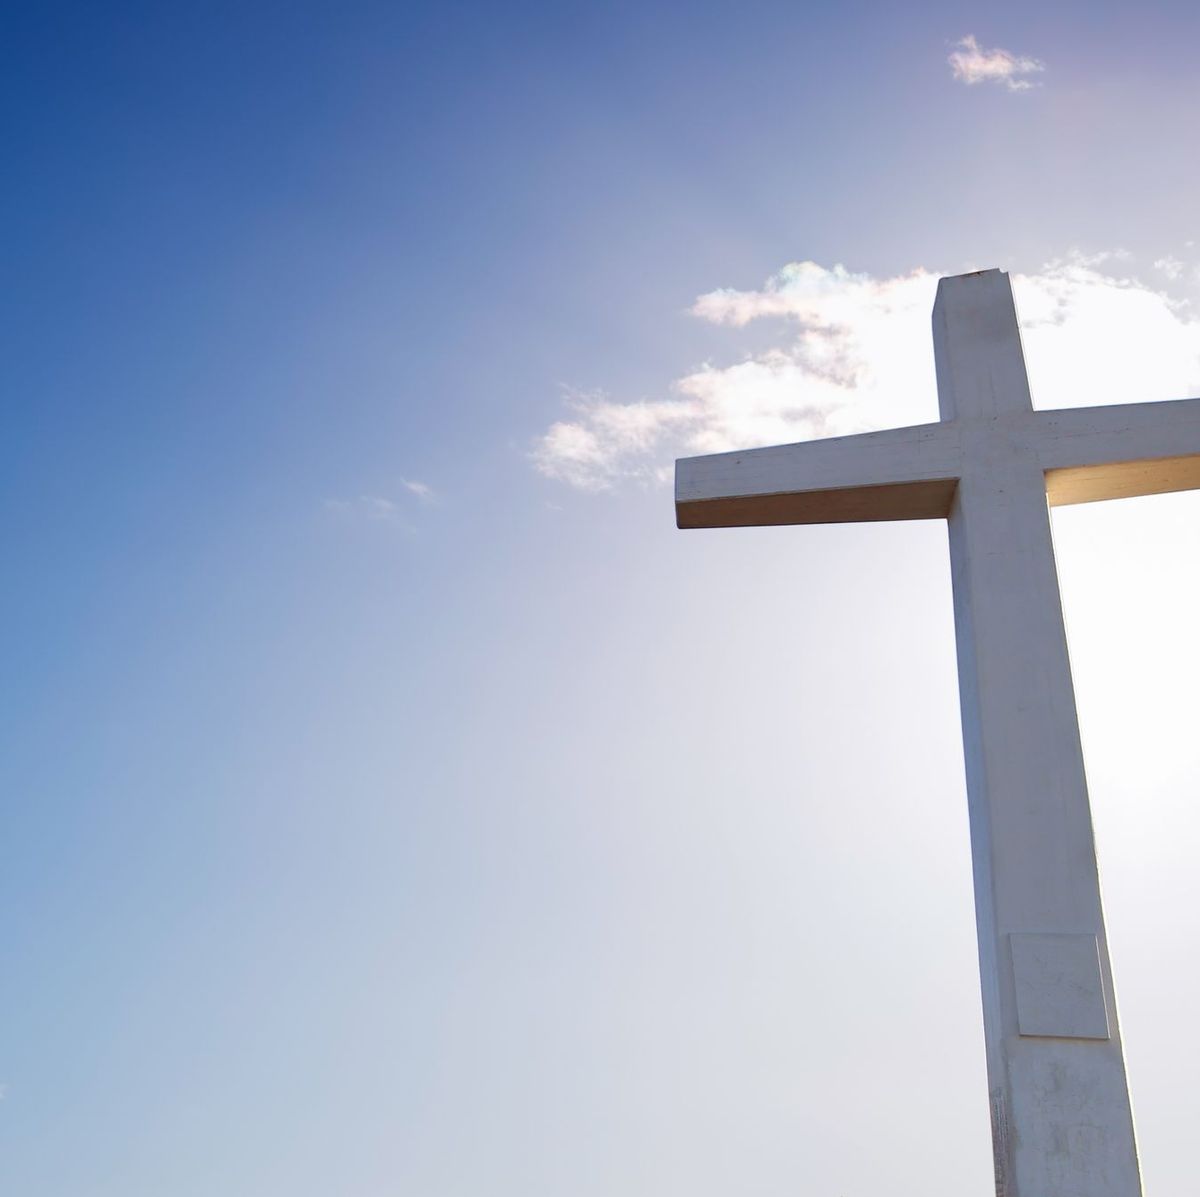 What Is Good Friday? Here's What the Holy Day Means